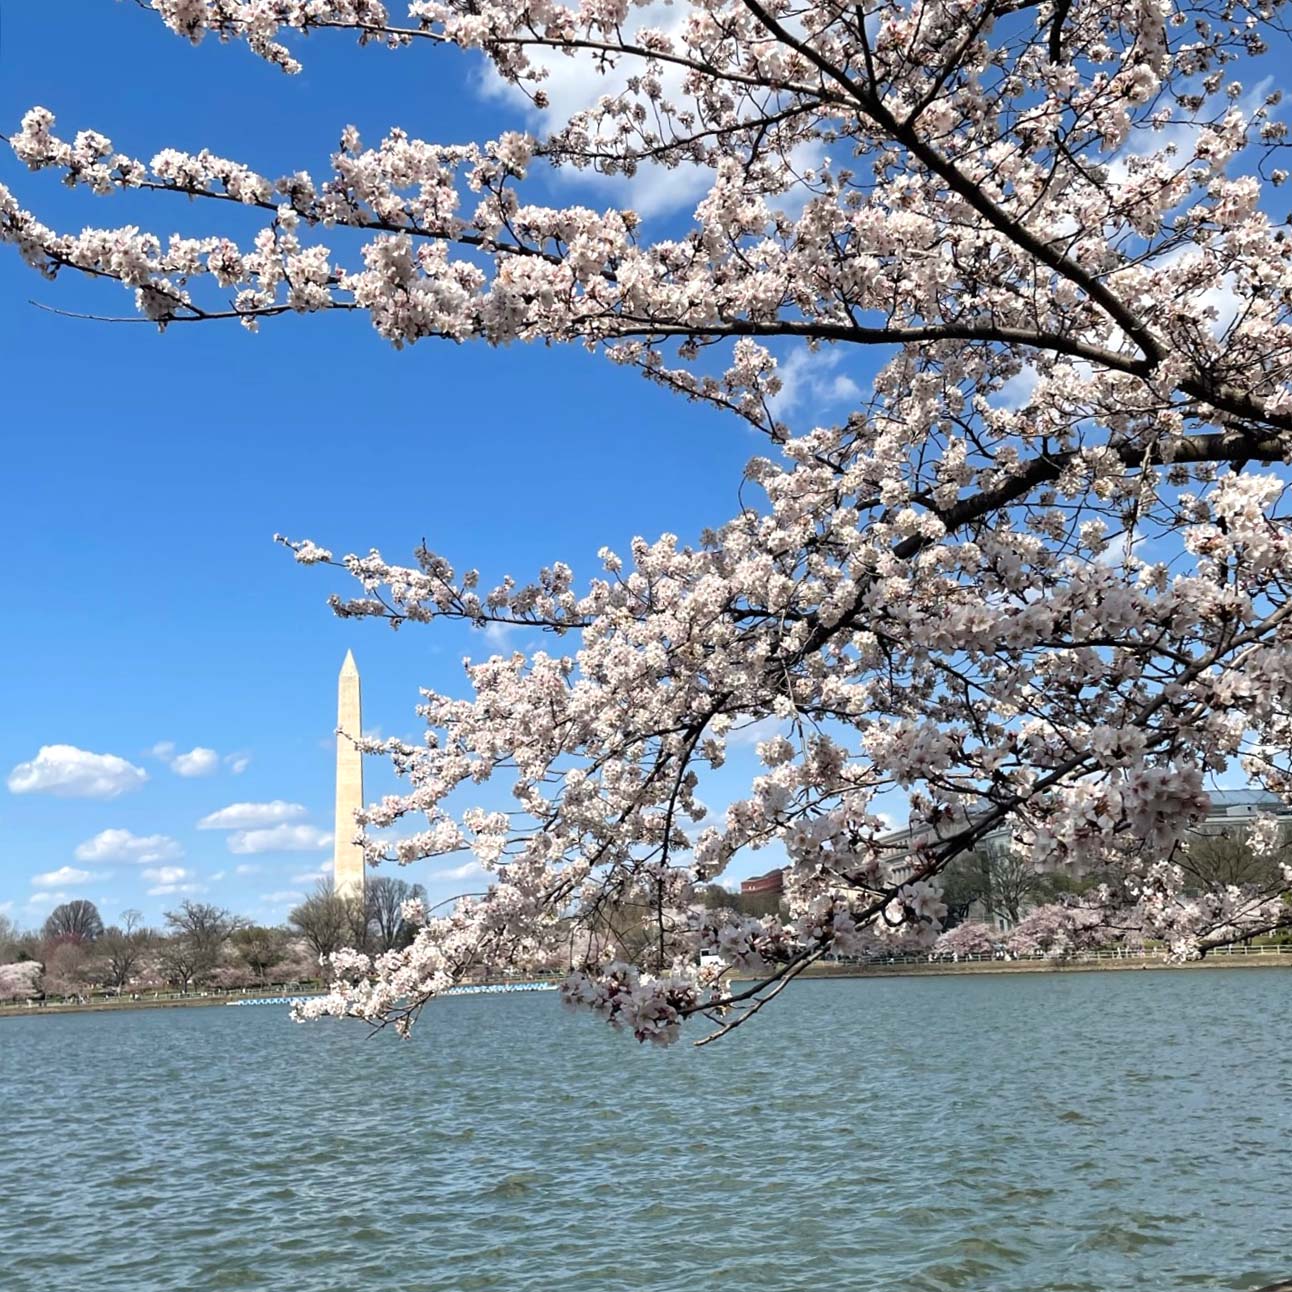 A Fresh Look at the Cherry Blossom Festival in Washington D.C. Master